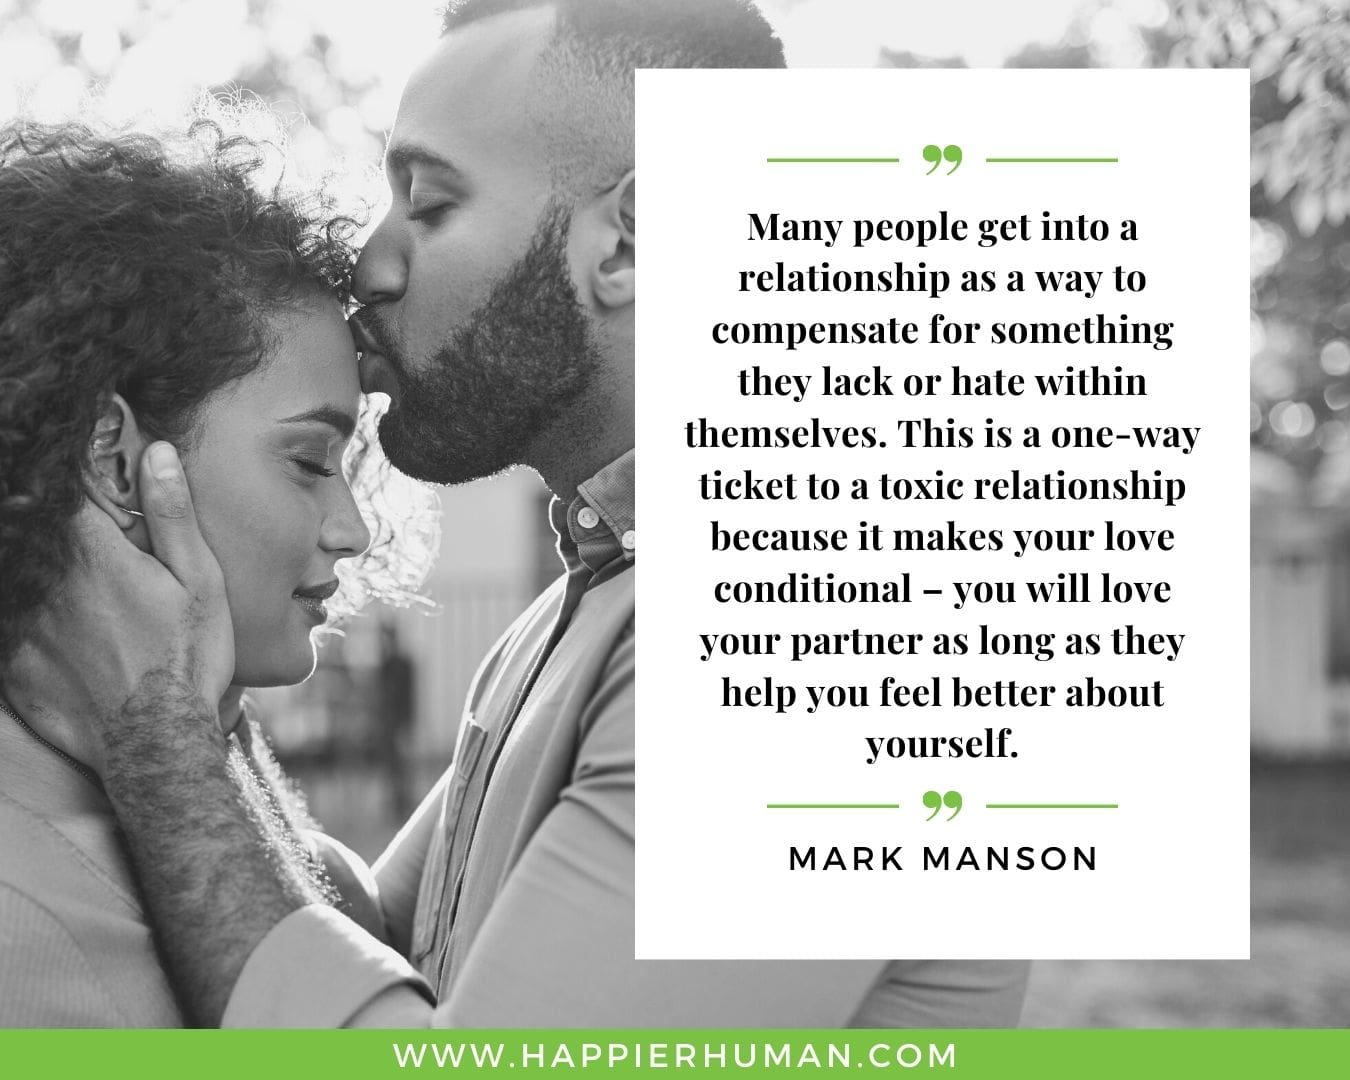 Toxic People Quotes - “Many people get into a relationship as a way to compensate for something they lack or hate within themselves. This is a one-way ticket to a toxic relationship because it makes your love conditional – you will love your partner as long as they help you feel better about yourself.” – Mark Manson